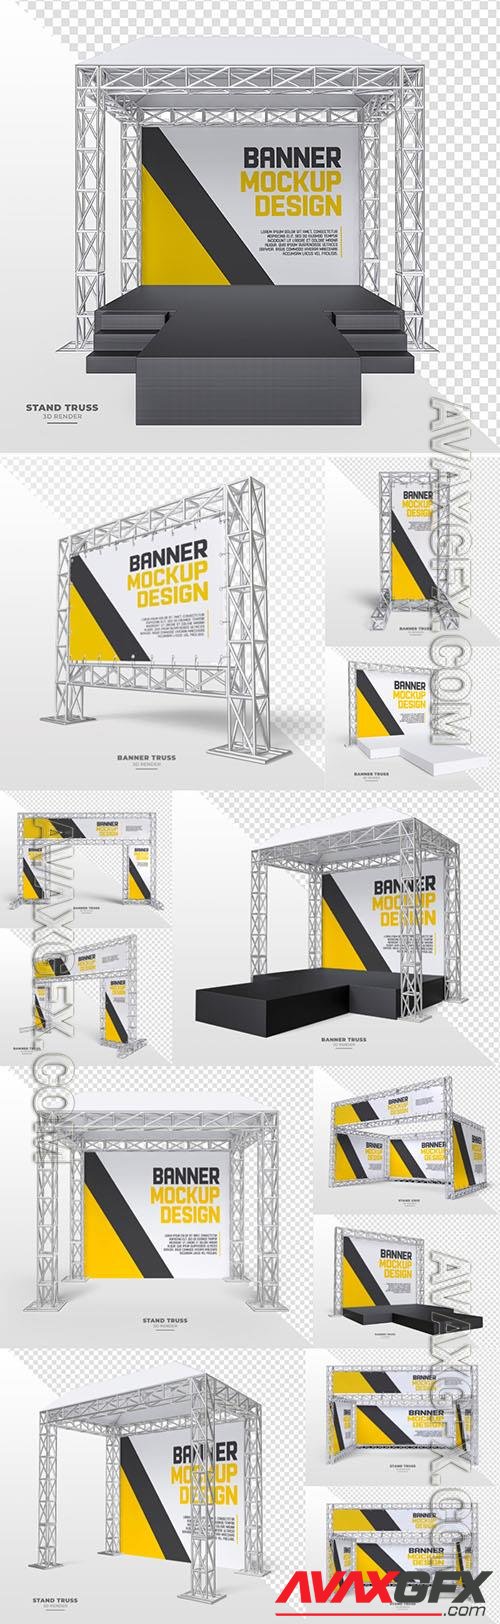 Outdoor advertising banner set with realistic metal truss system black and yellow[PSD]